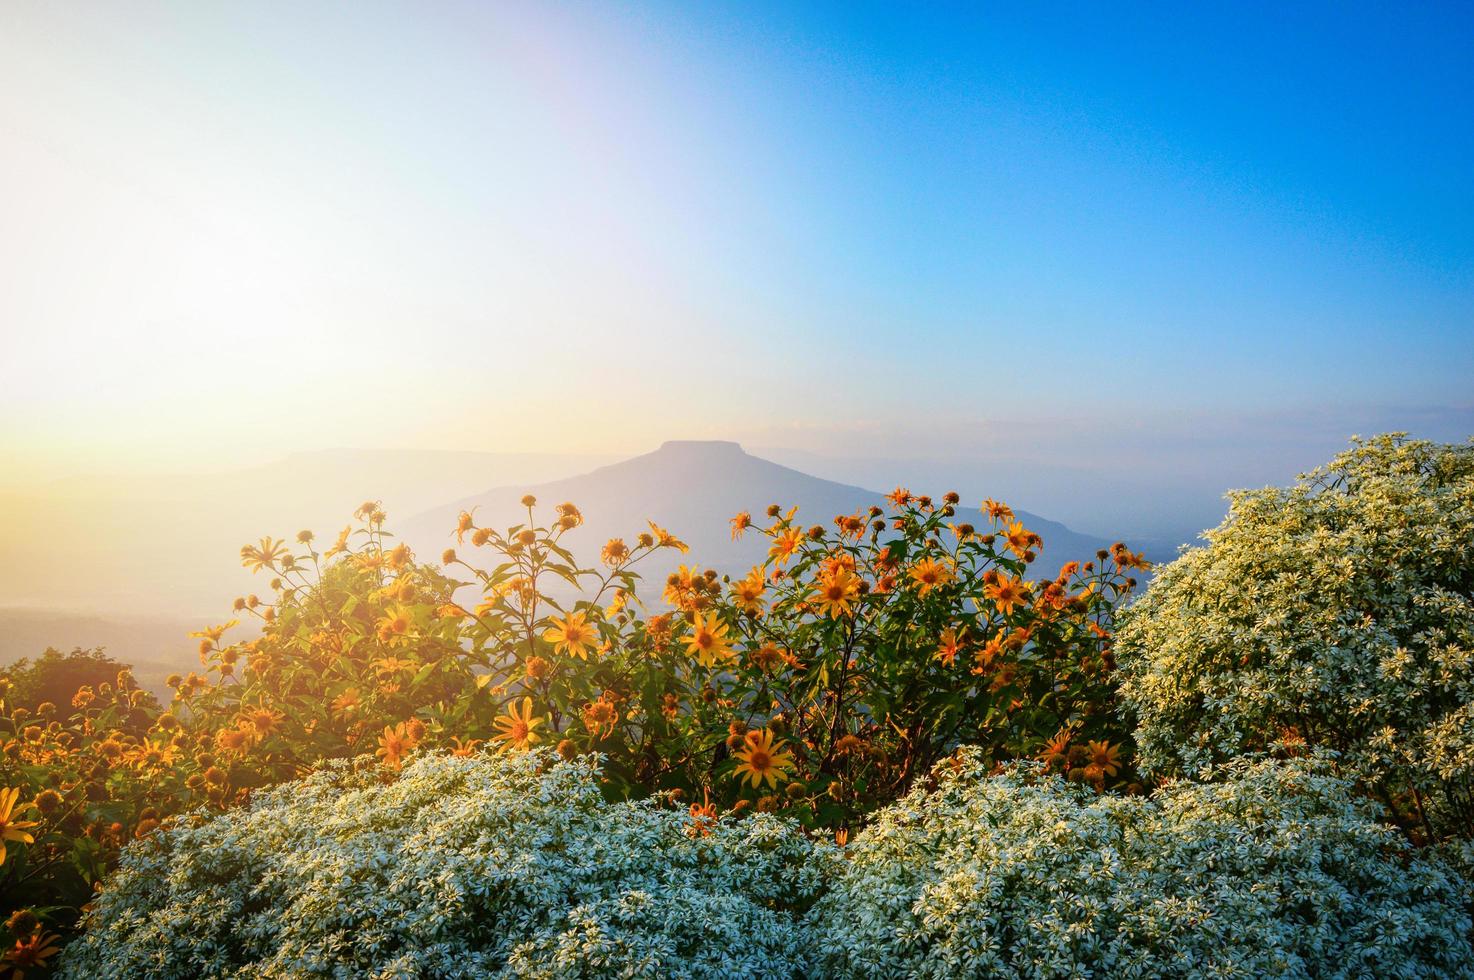 Landscape Thailand beautiful mountain scenery view on hill with tree marigold yellow and white flower field photo